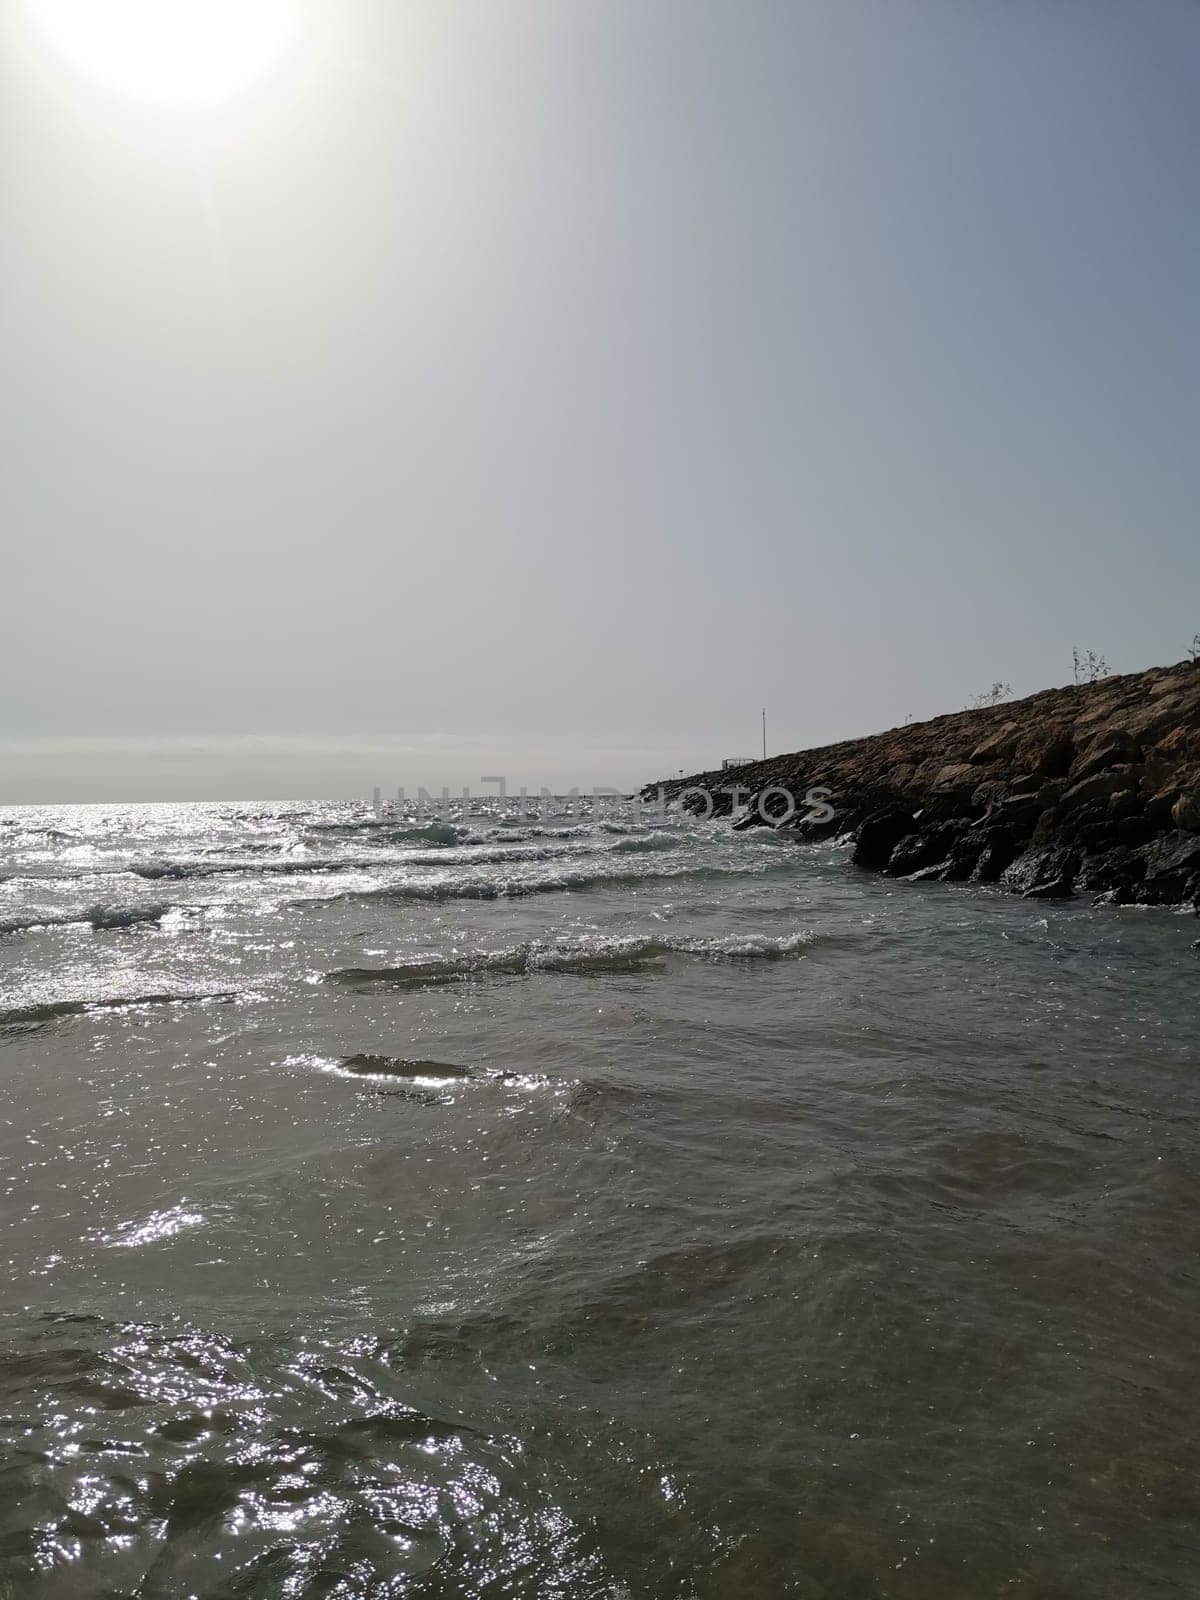 A vast expanse of liquid water with a rugged shore in the distance, under a clear sky. The landscape features coastal and oceanic landforms, with wind waves breaking on the shore